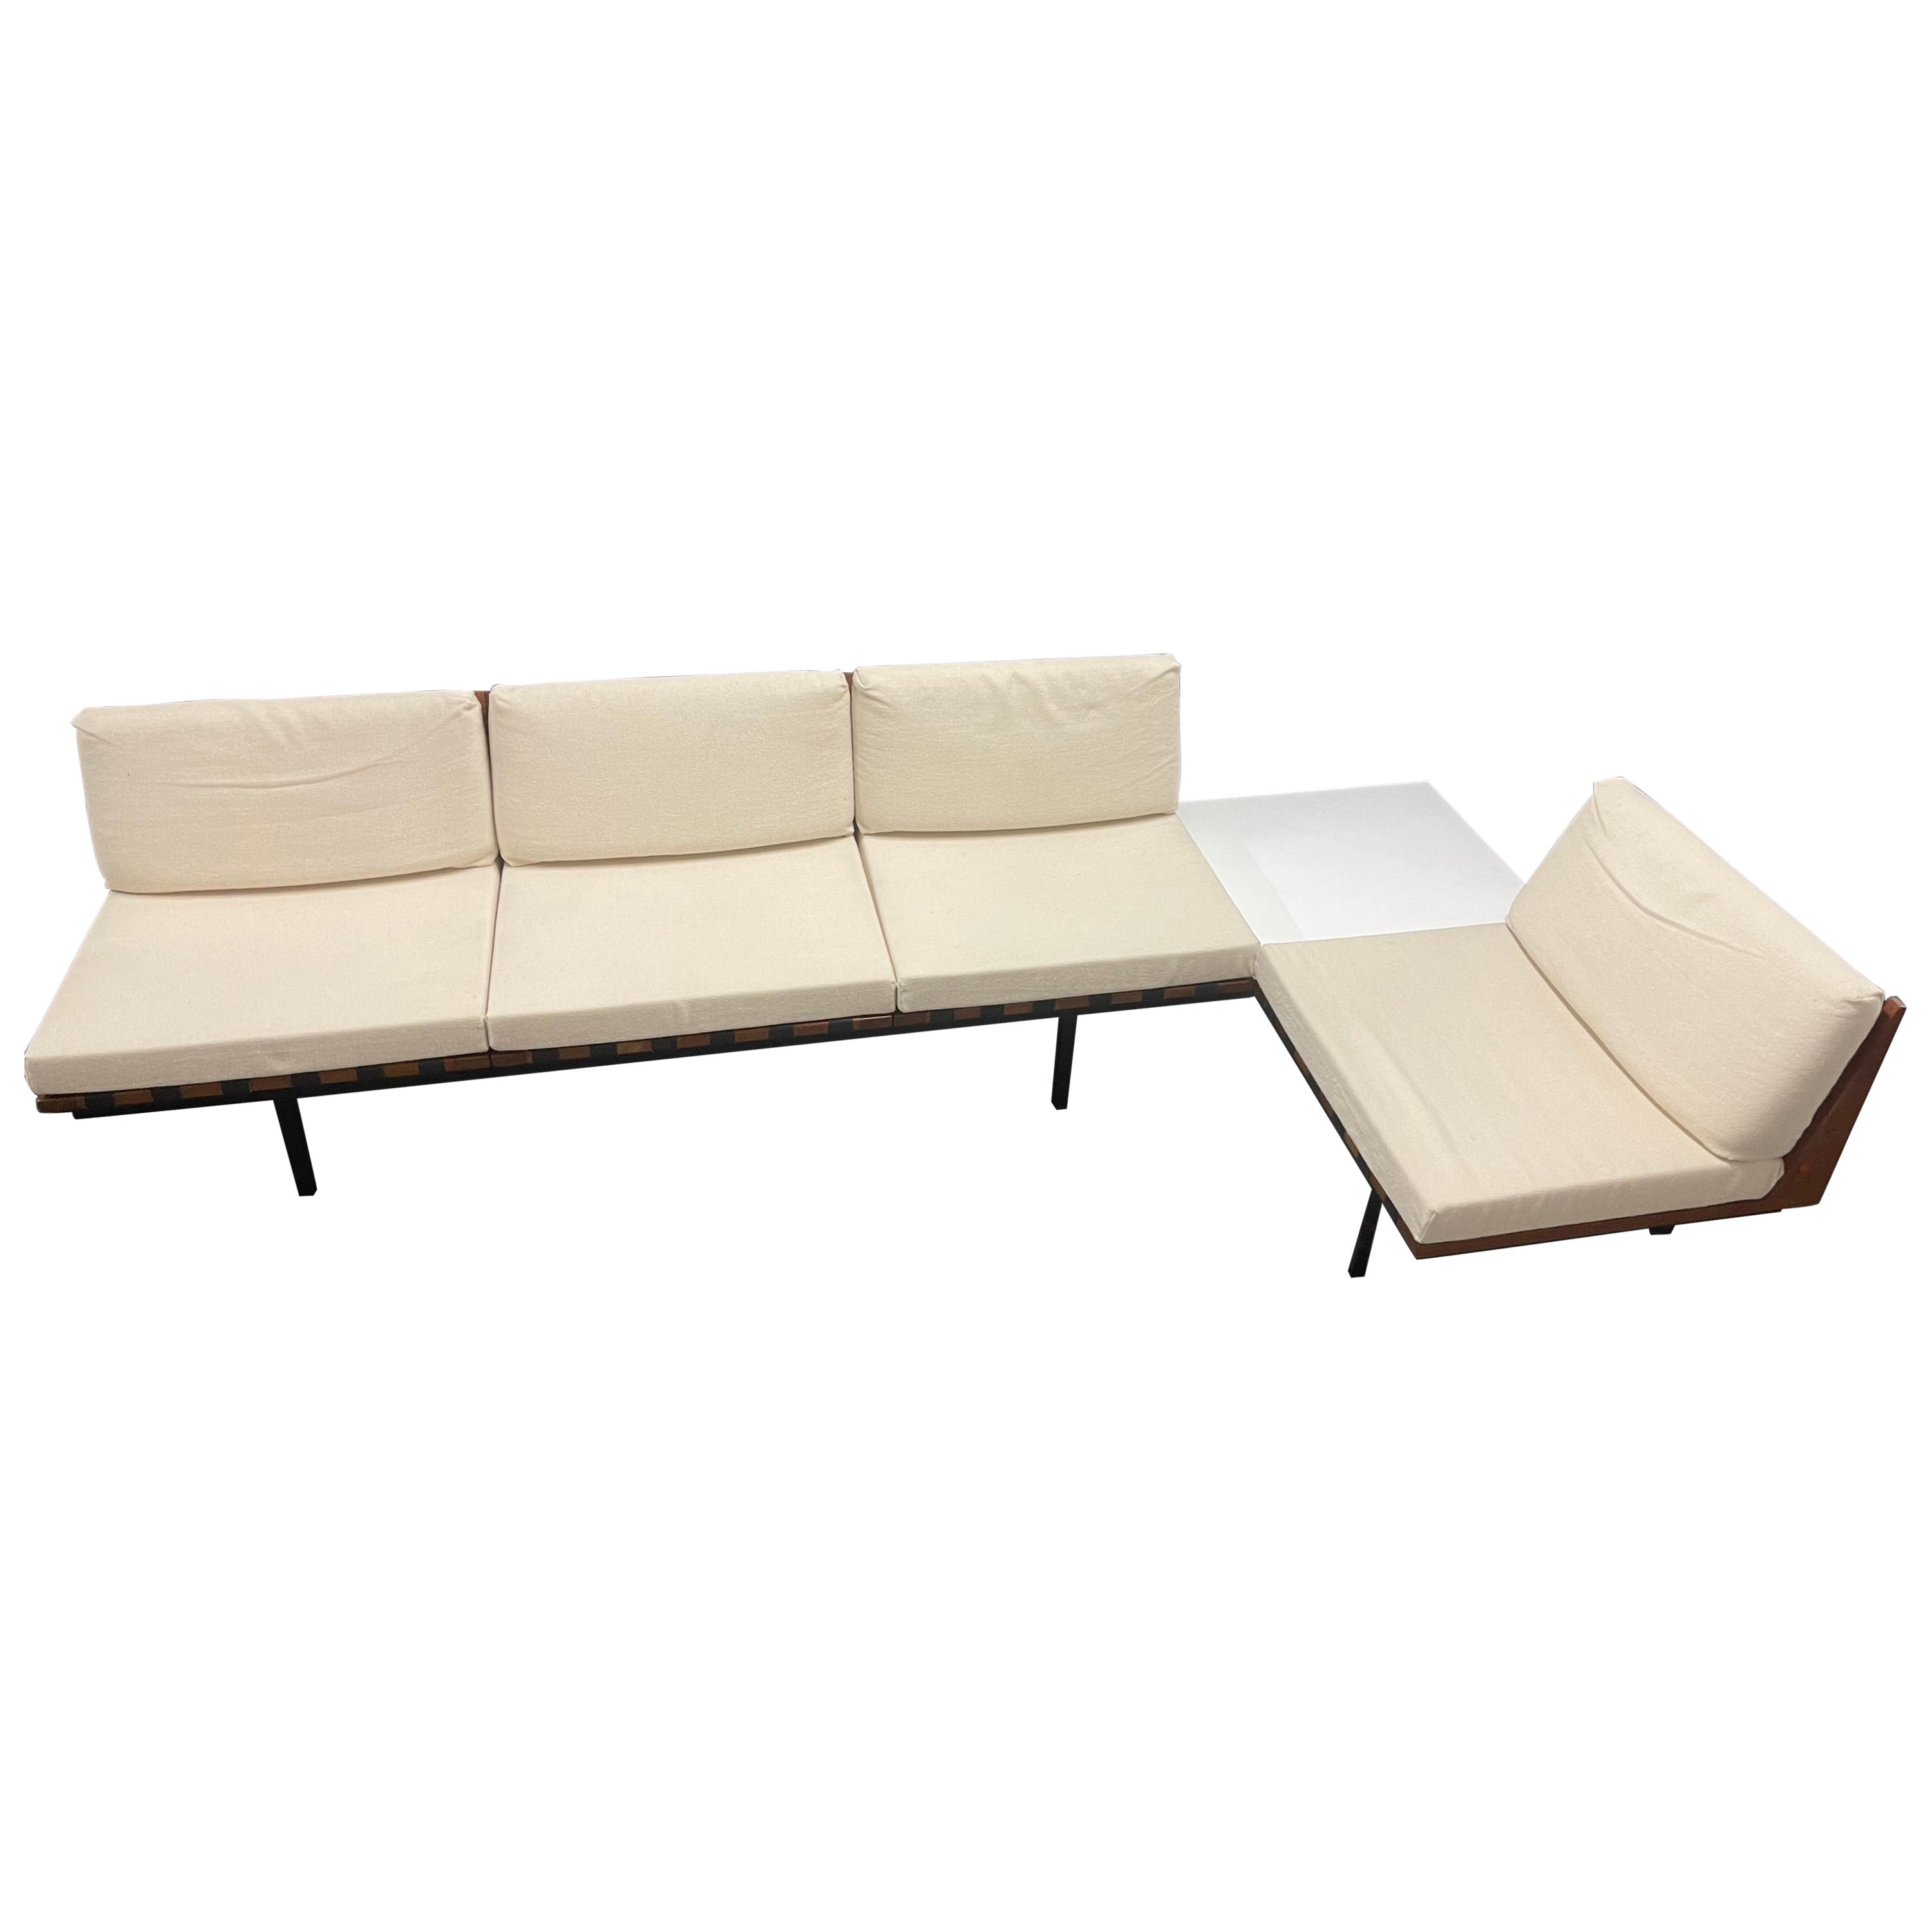 Very Rare Robin Day Form Group Sofa Set For Sale